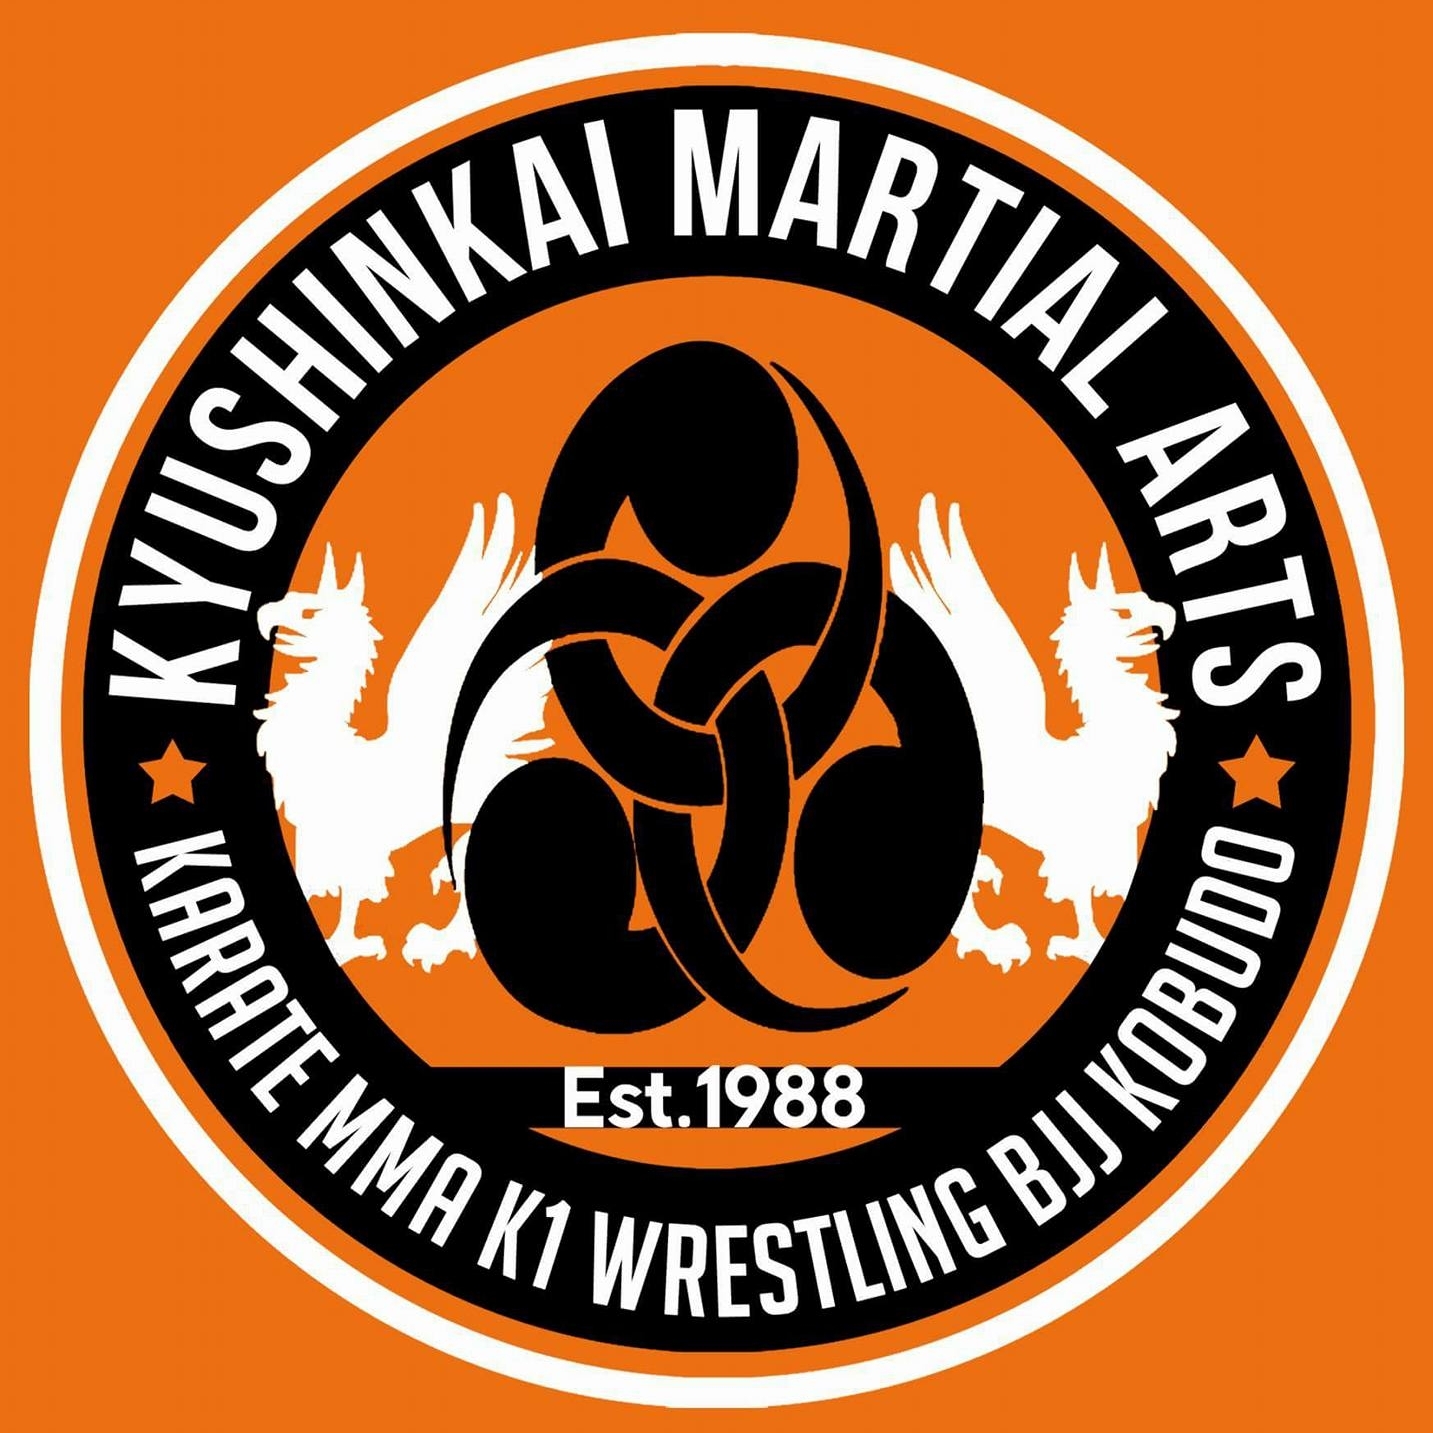 Join in competitive team sports Image for Kyu-shin-kai martial arts